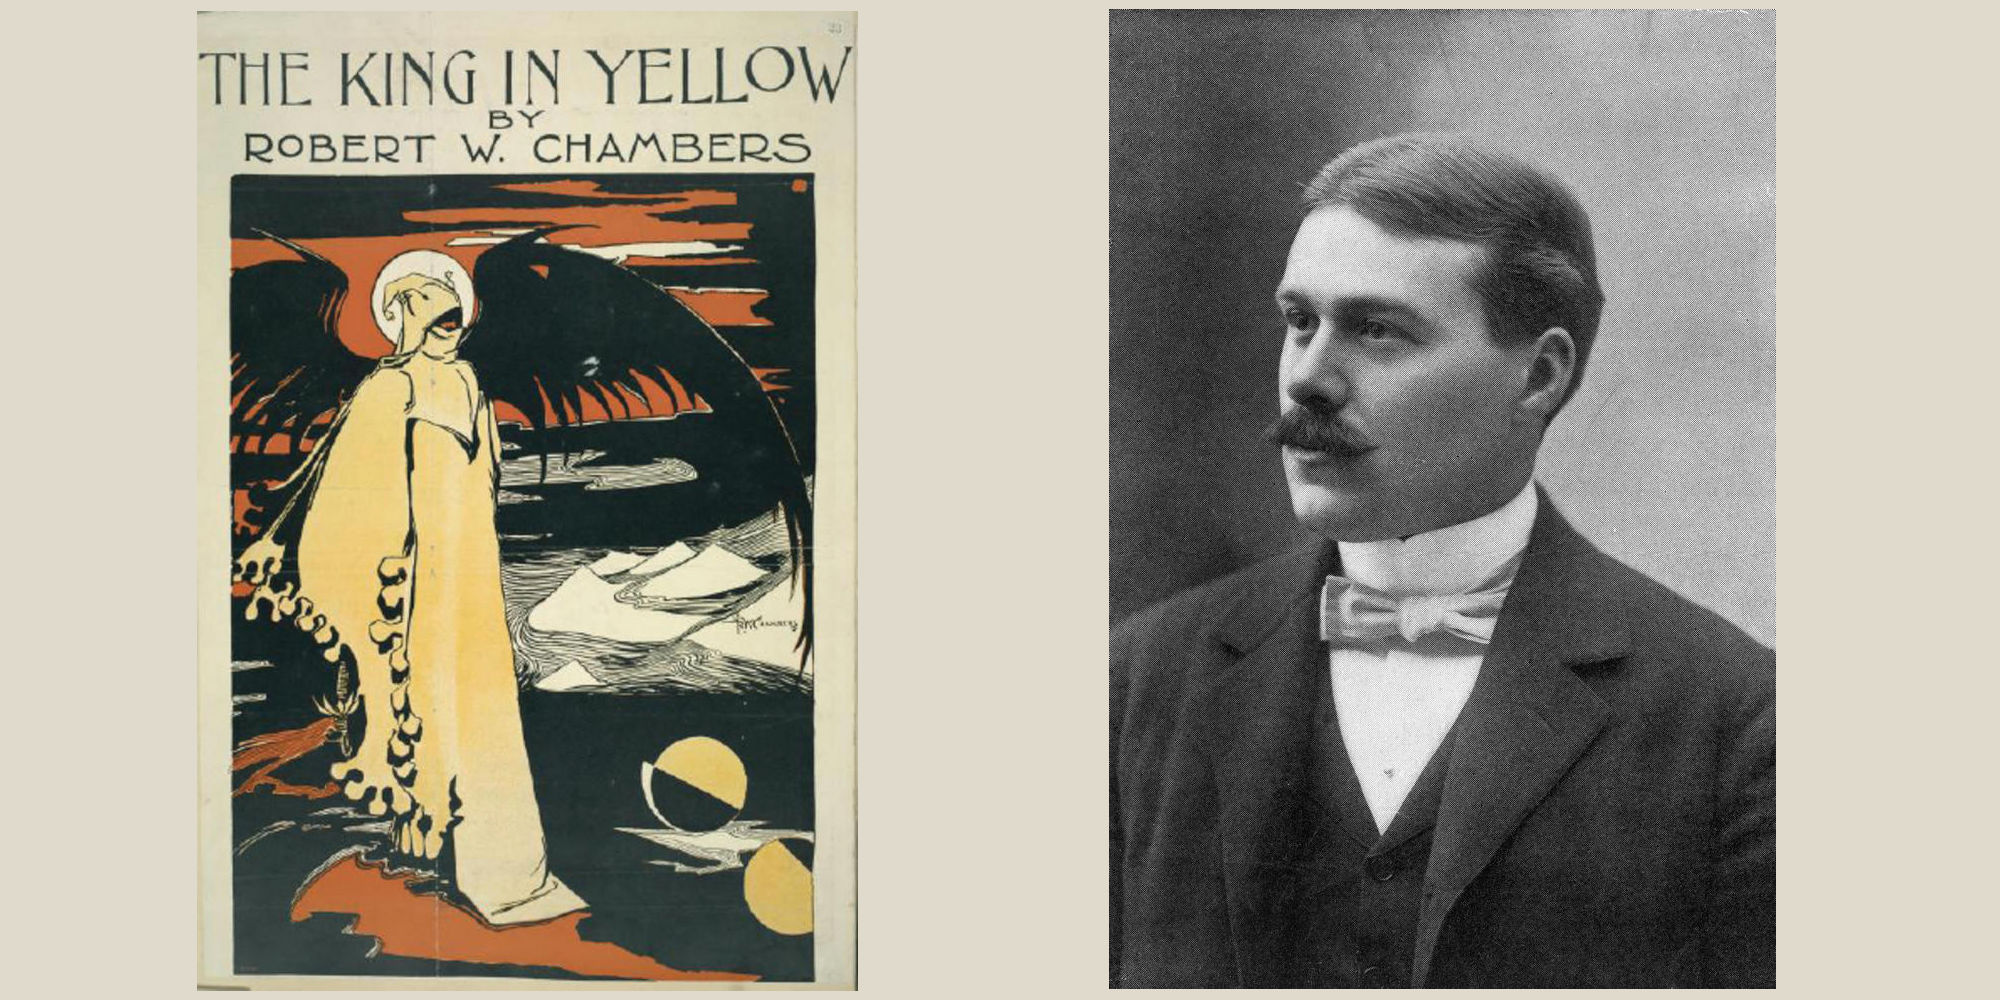 Picture of Robert W. Chambers and the cover form the first edition of The King in Yellow